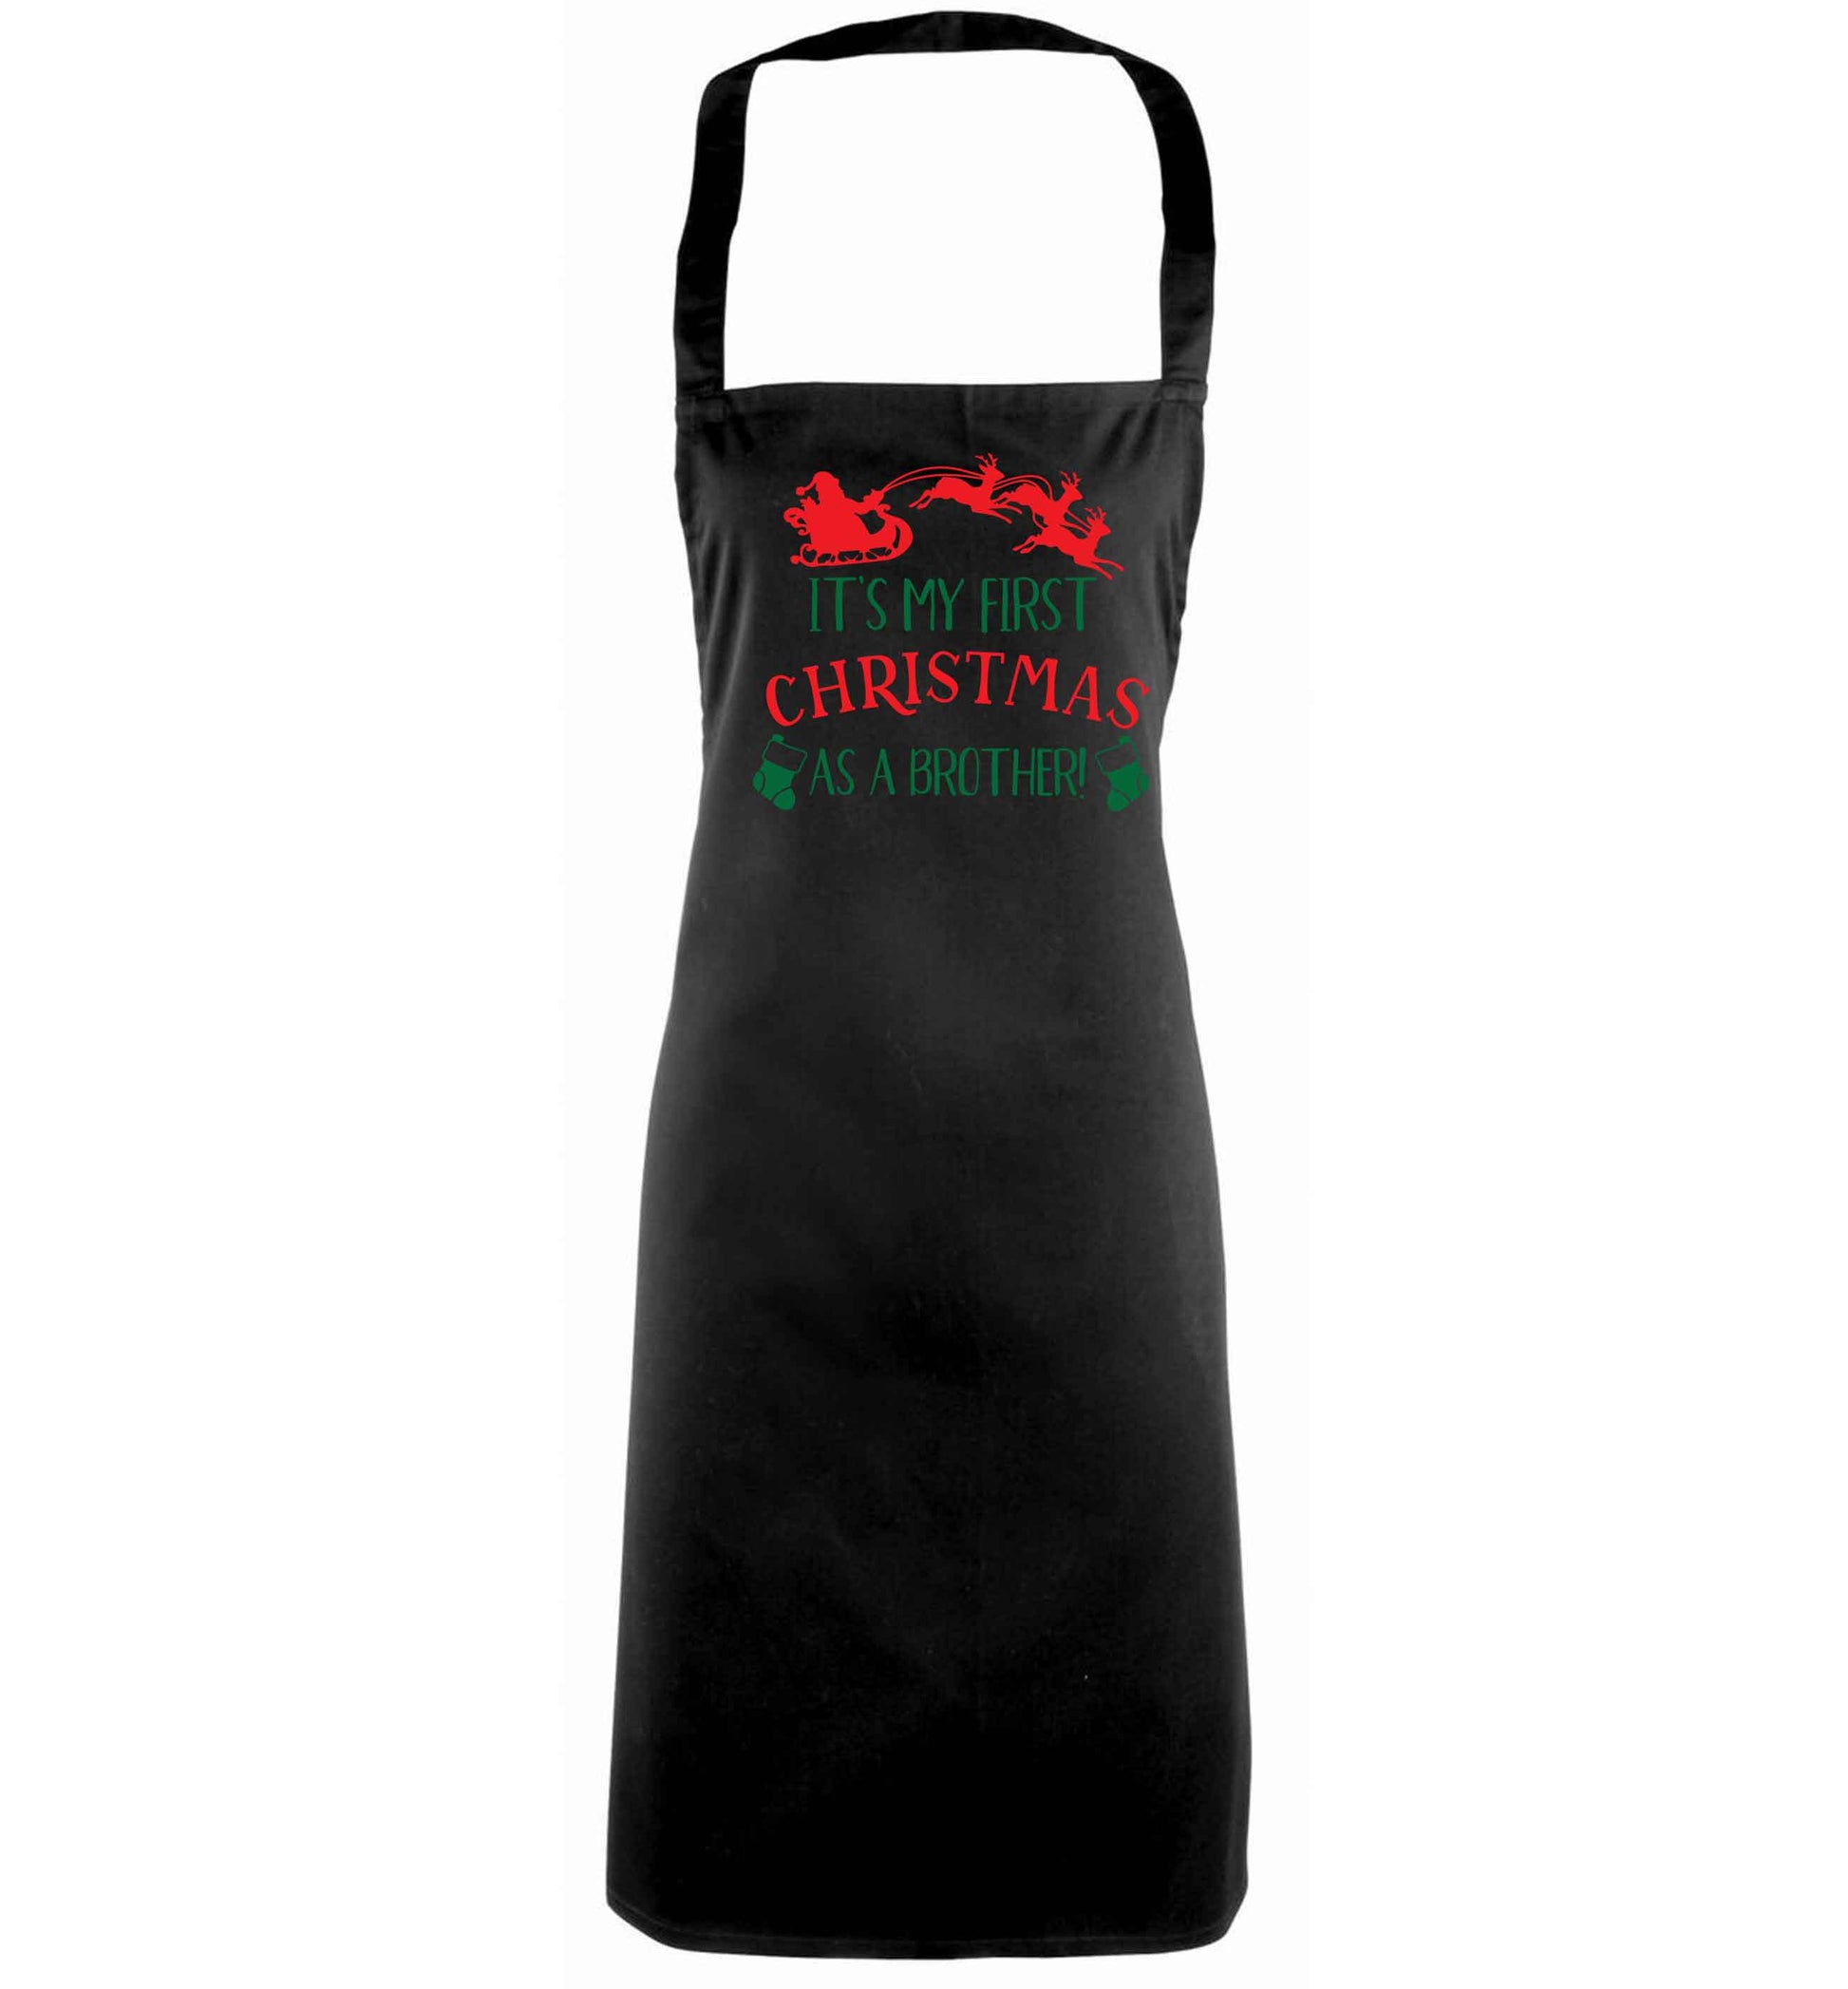 It's my first Christmas as a brother! black apron